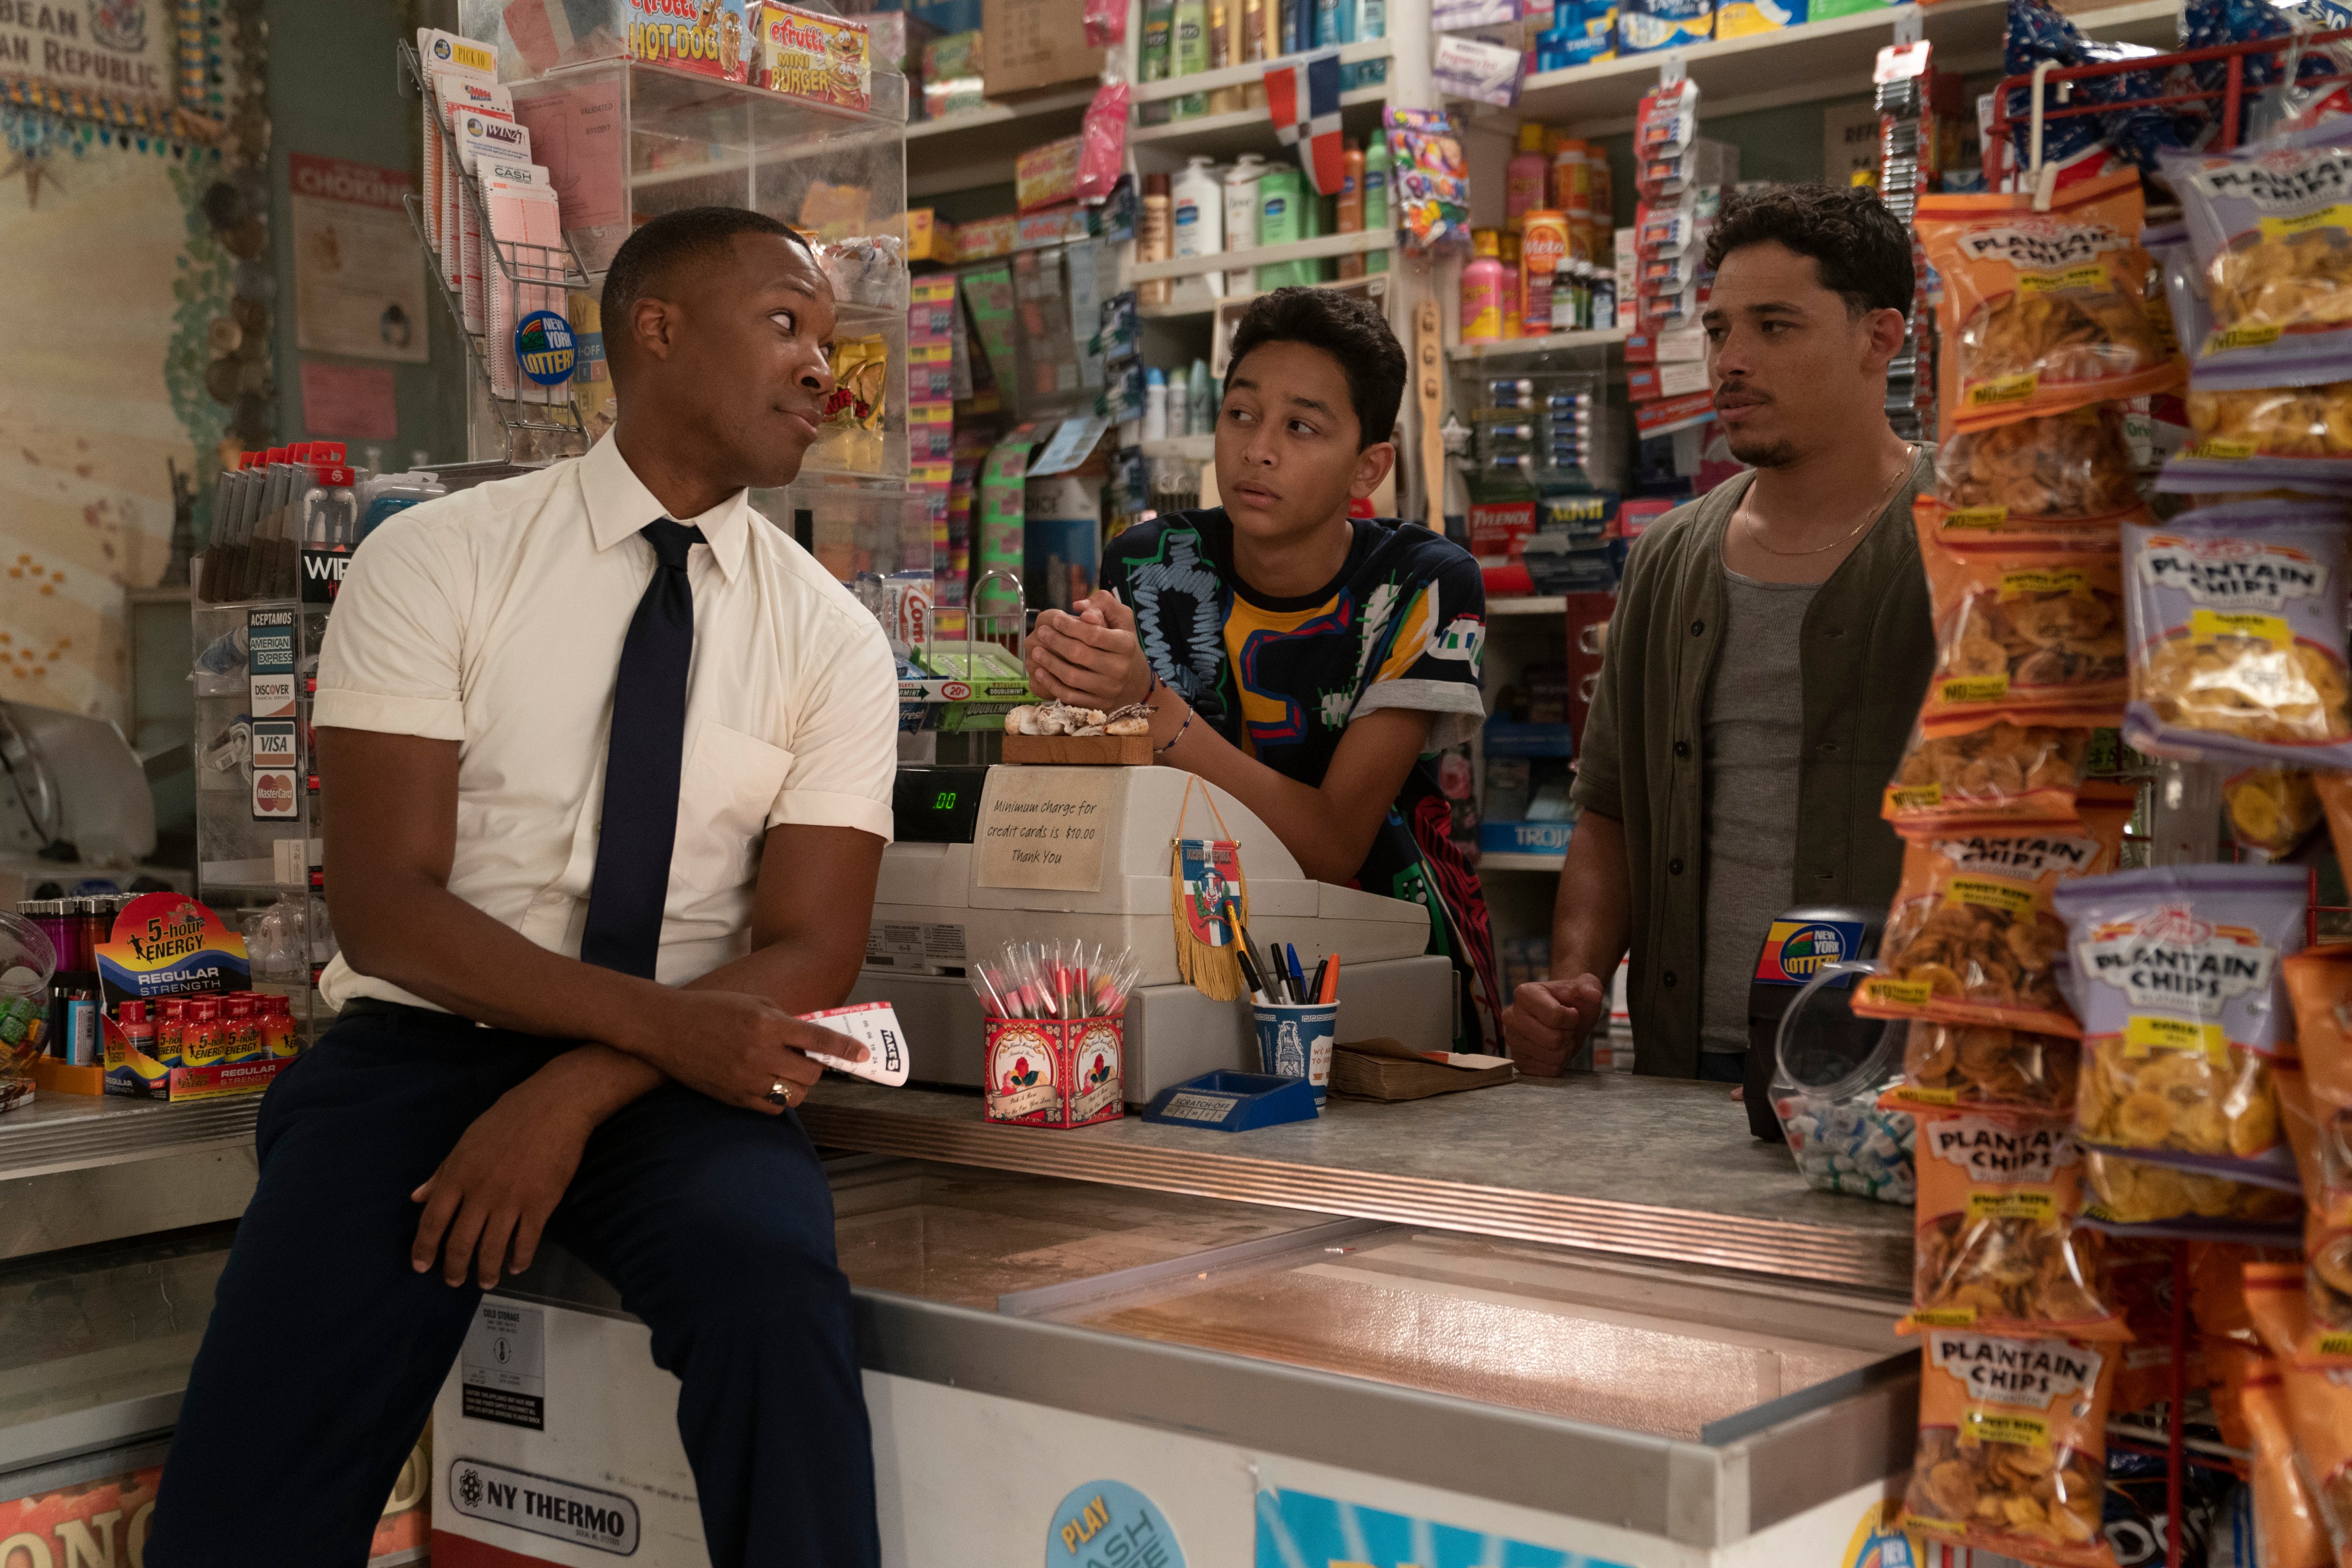 Anthony Ramos (right) in his bodega with Benny (Corey Hawkins) and Sonny (Gregory Diaz IV) (Macall Polay © 2019 Warner Bros. Entertainment Inc. All Rights Reserved)